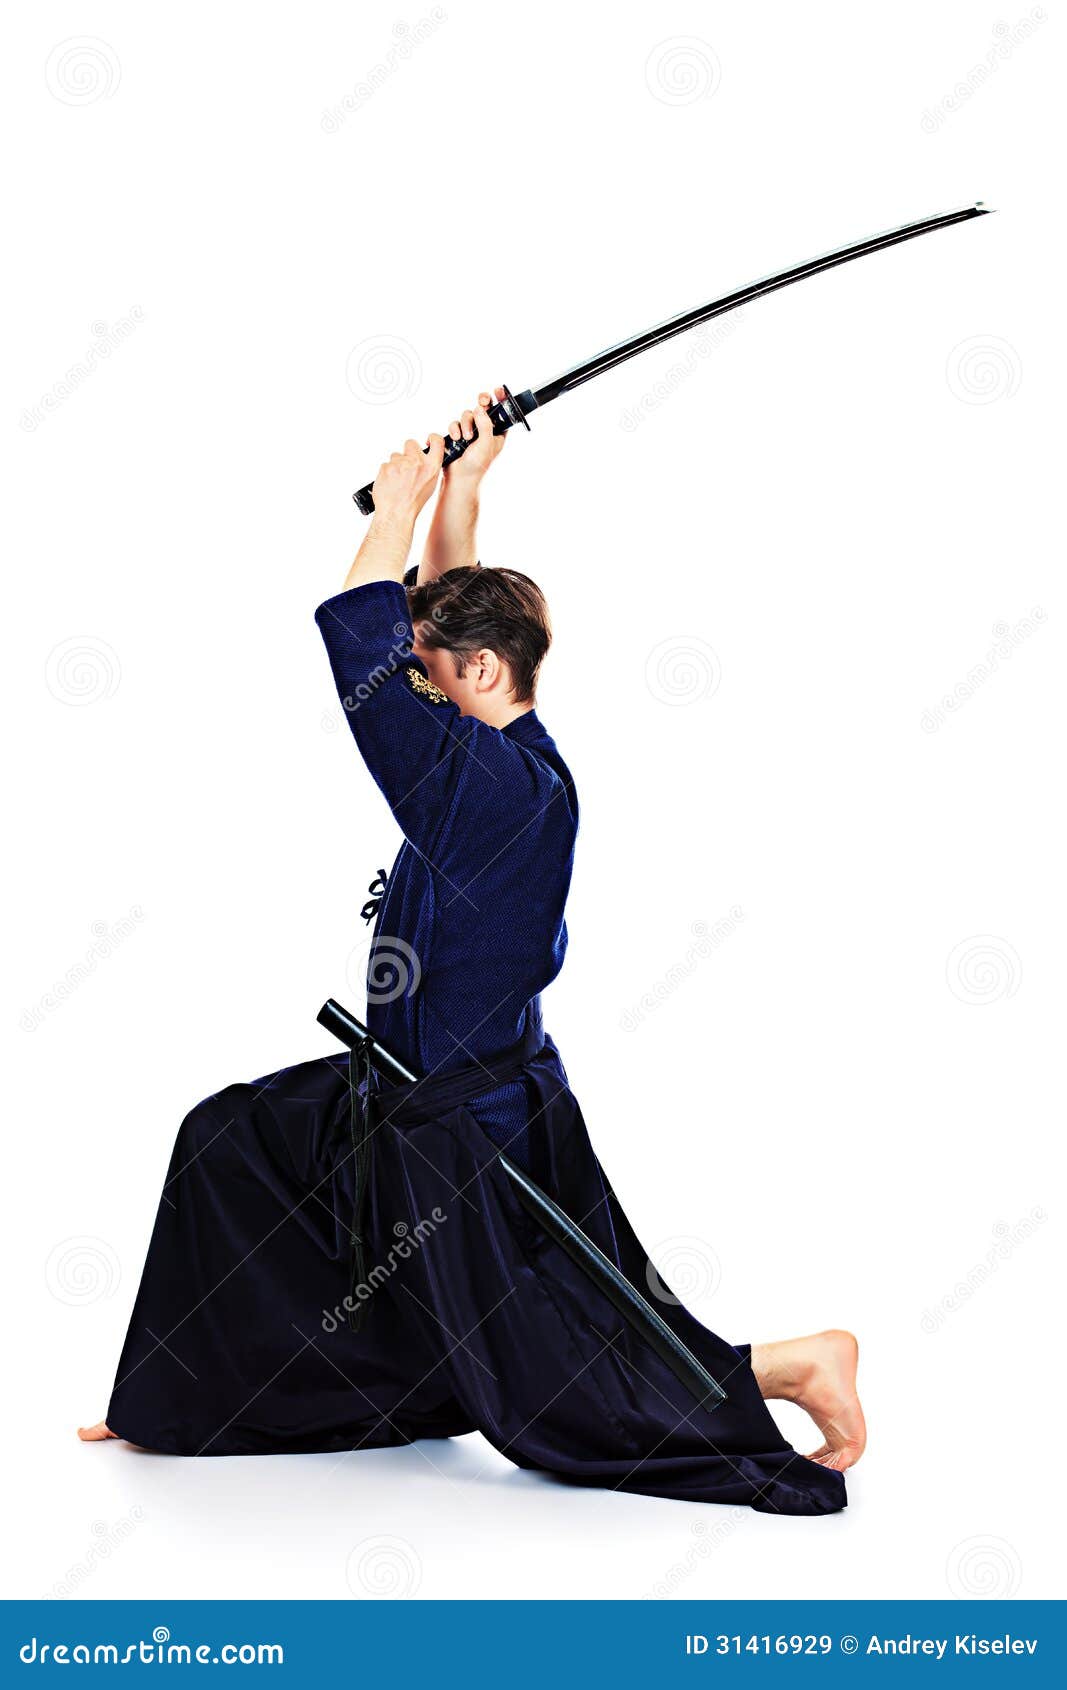 Fighting Pose Royalty Free Stock Images - Image: 31416929